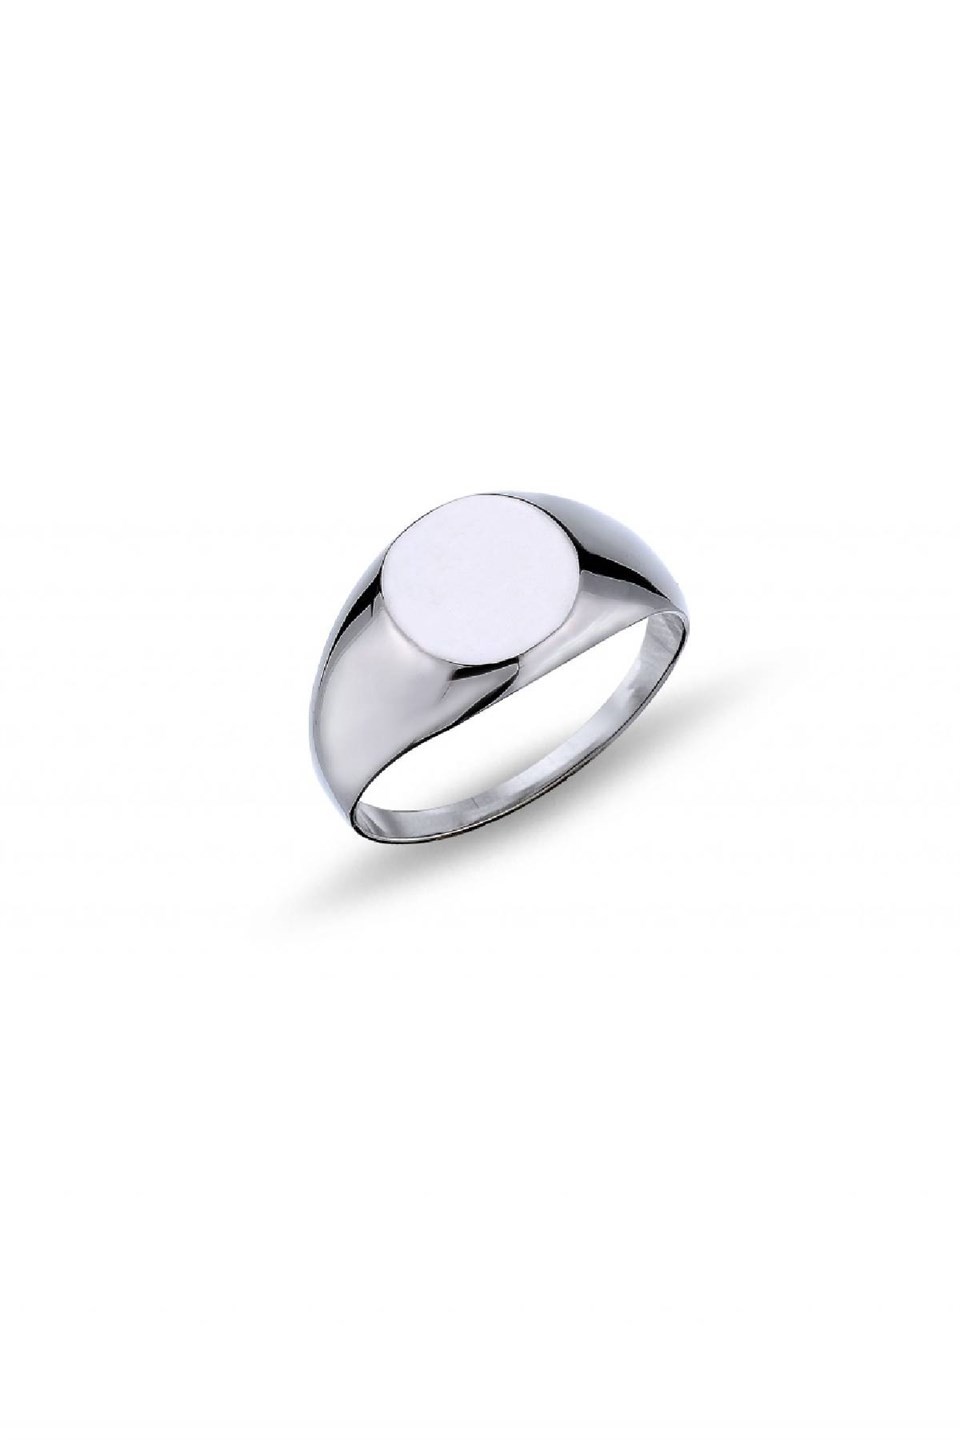 Silver sparrow finger ring